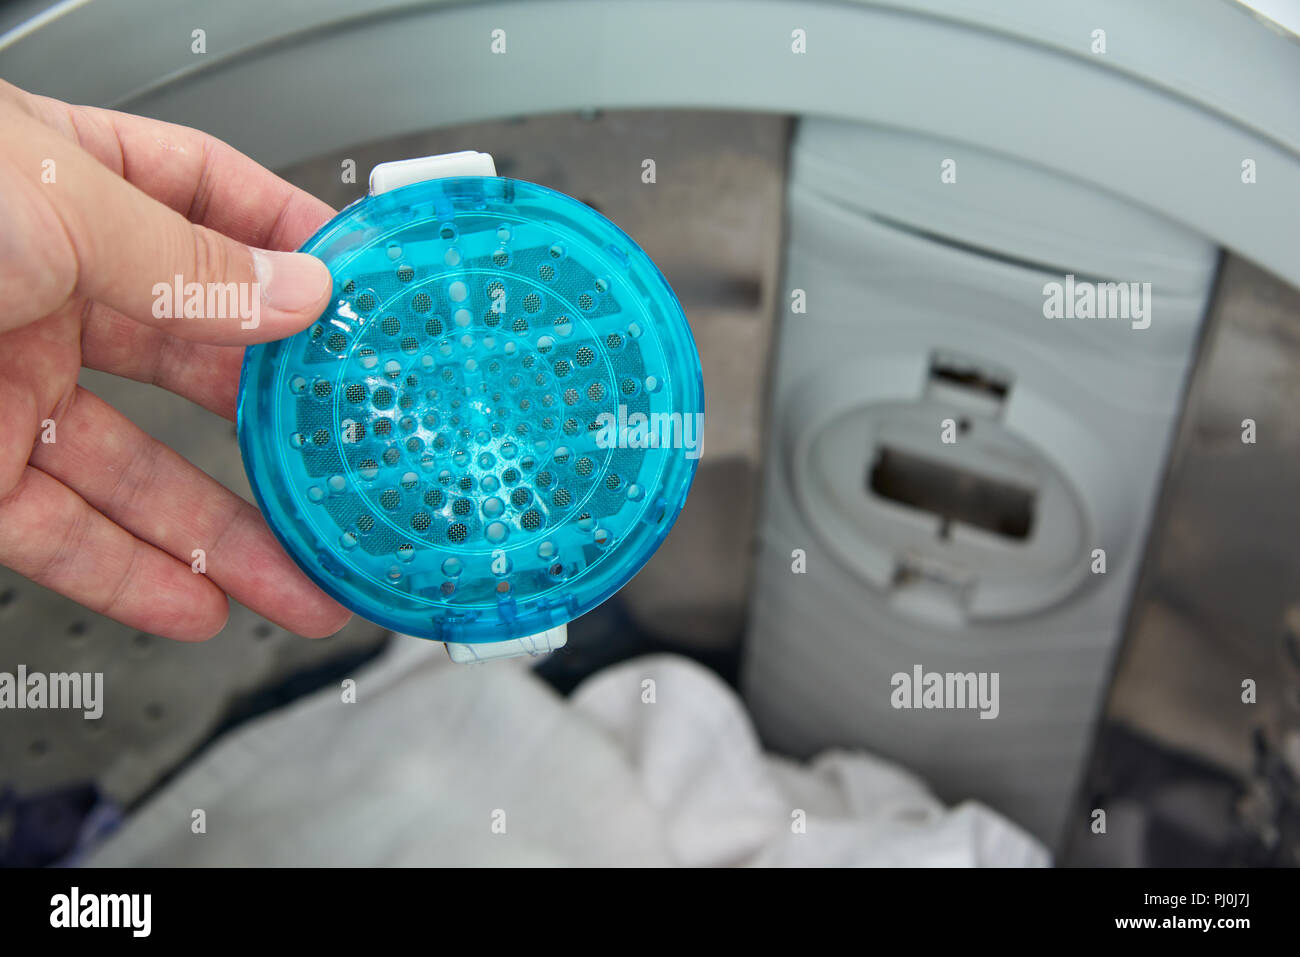 filter for filtering out dust from washing in a top load washer machine Stock Photo